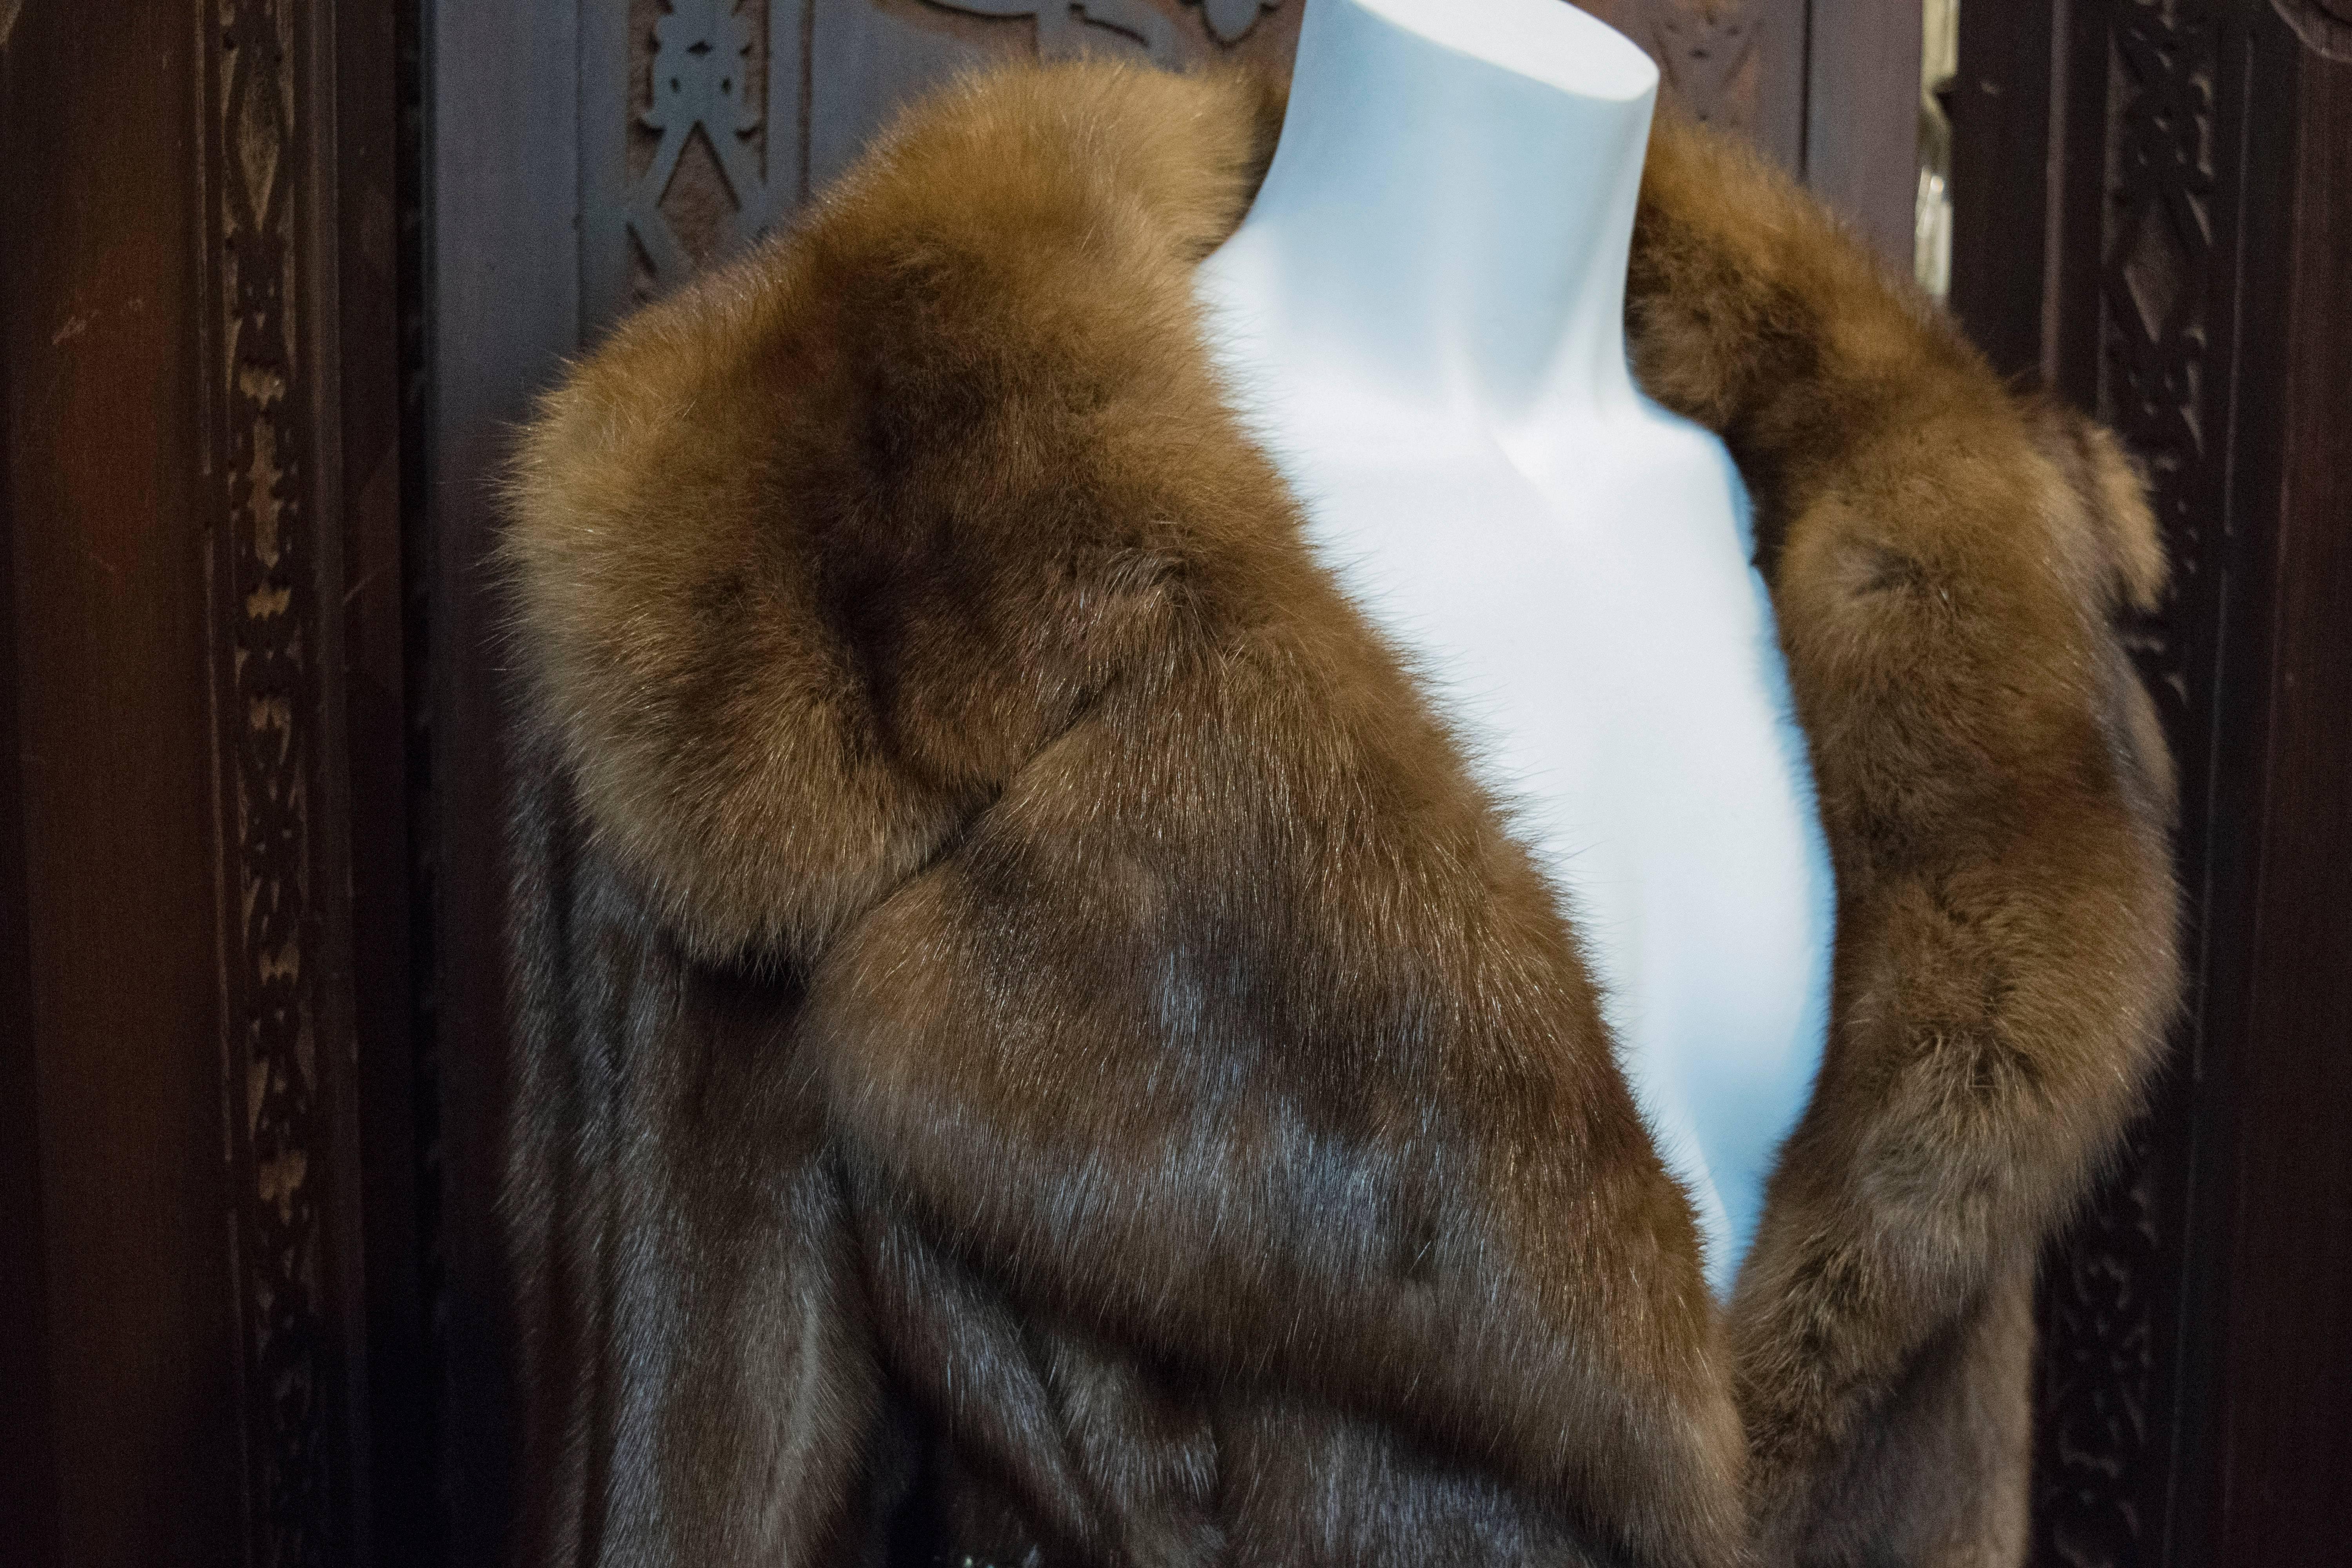 Mink and Sable Trimmed Fur Coat.
A gorgeously soft and silky mink fur coat trimmed with Sable with a beautiful shine. The coat is shown belted for styling. Belt can be purchased. 

B 40
W 40
H 44
L 50